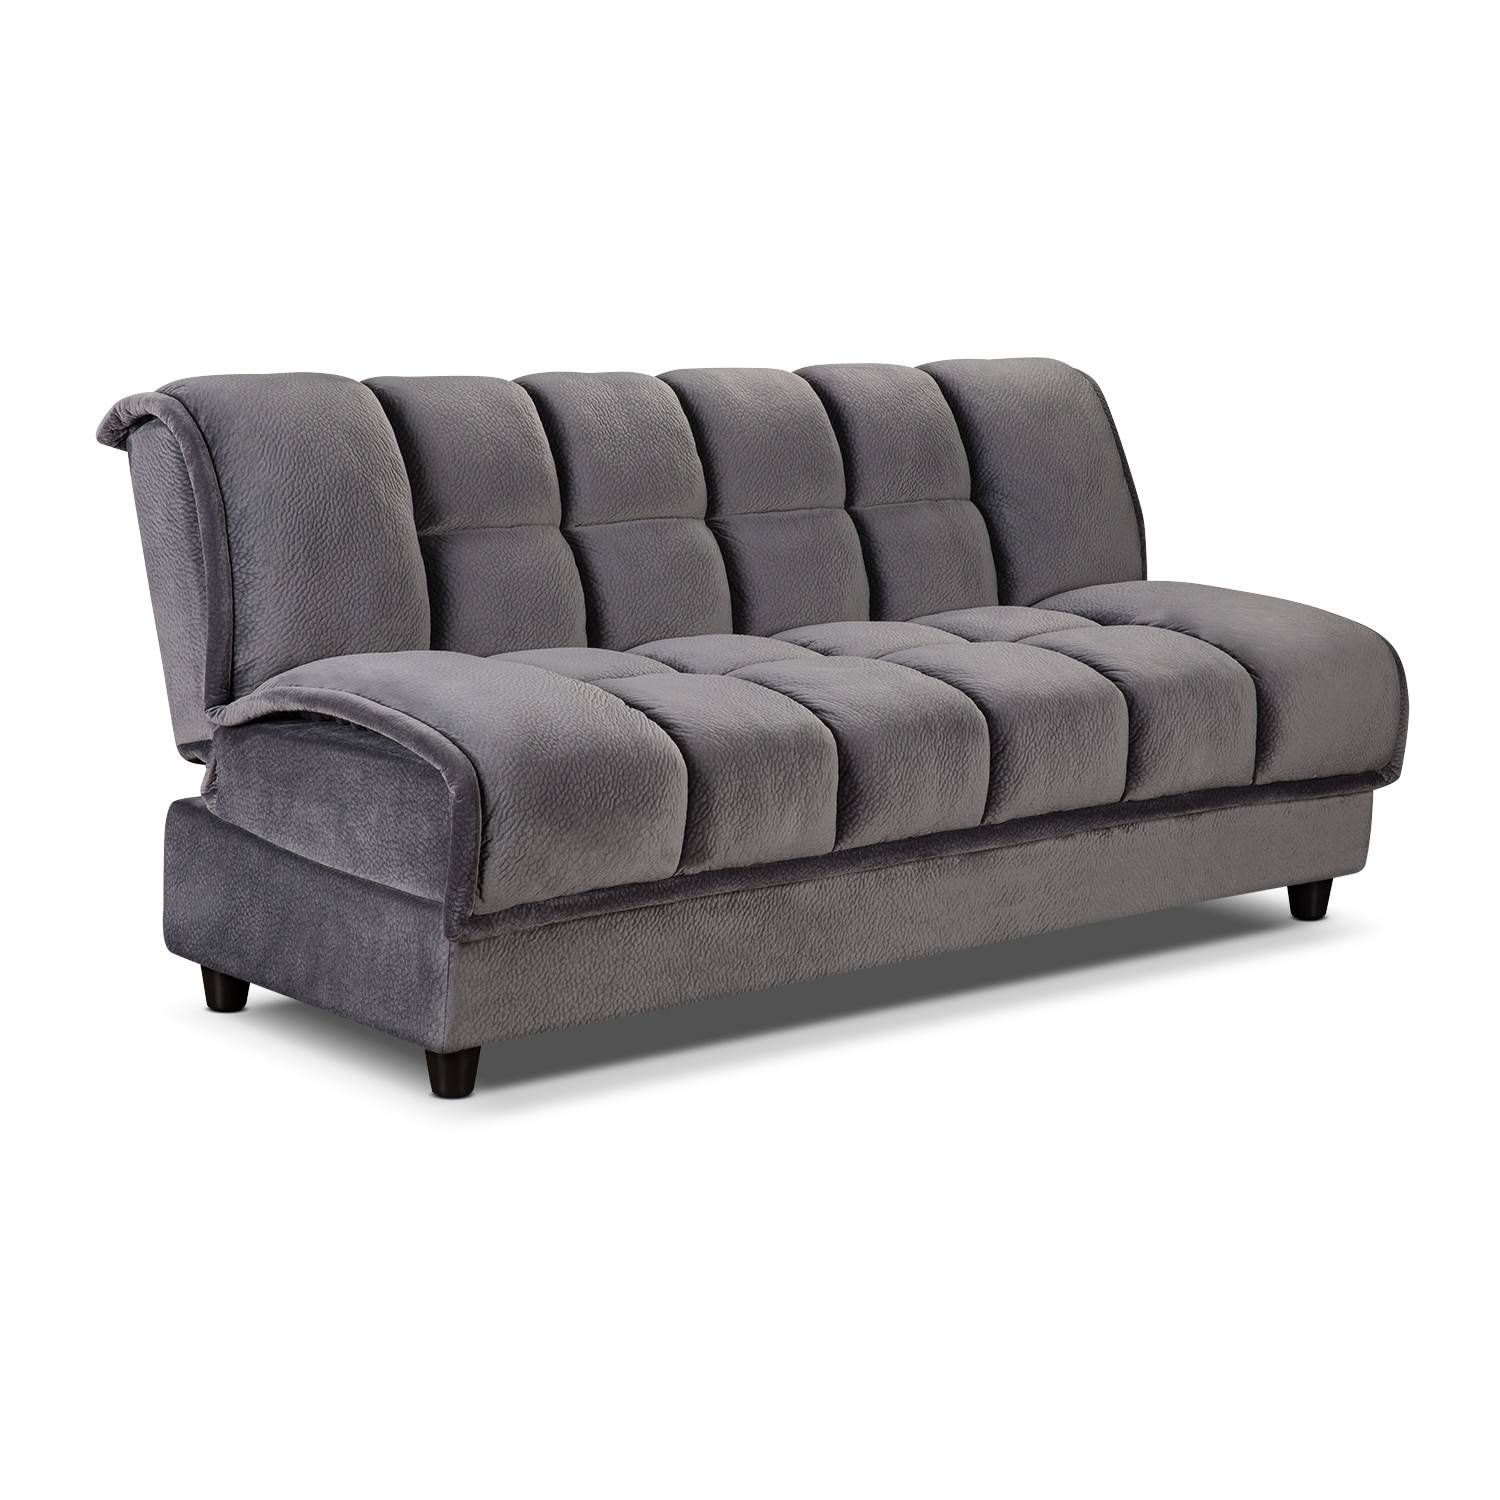 Futons | Living Room Seating | Value City Furniture For Value City Sofas (View 18 of 25)